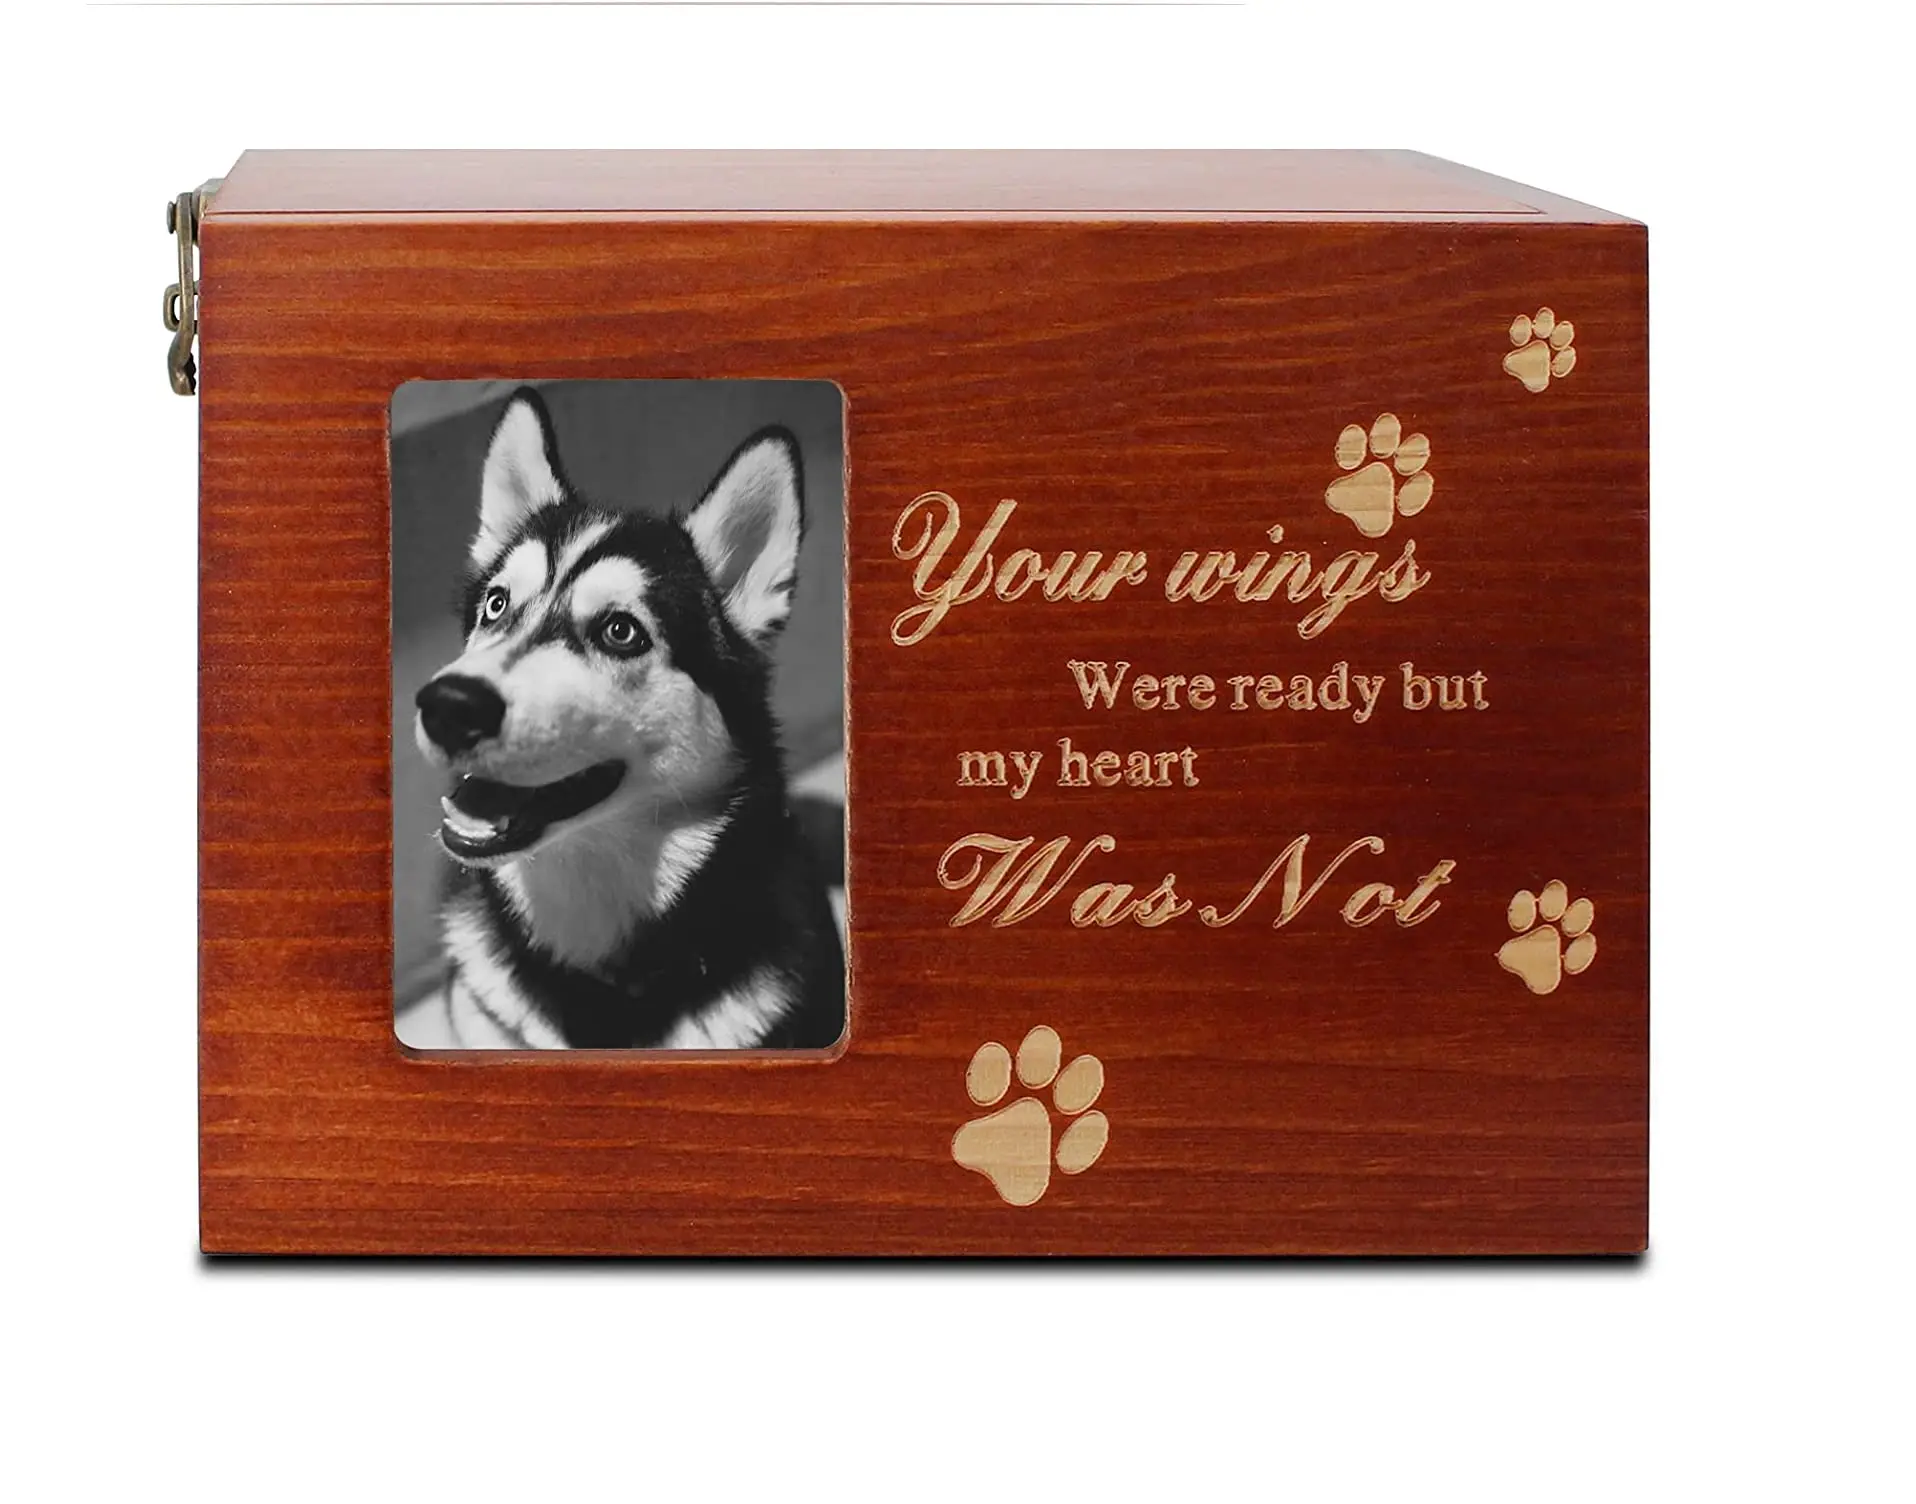 Pet Memorial Urns for Dog or Cat Ashes, Wooden Funeral Cremation Urns with Photo Frame, Memorial Keepsake Memory Box with Black